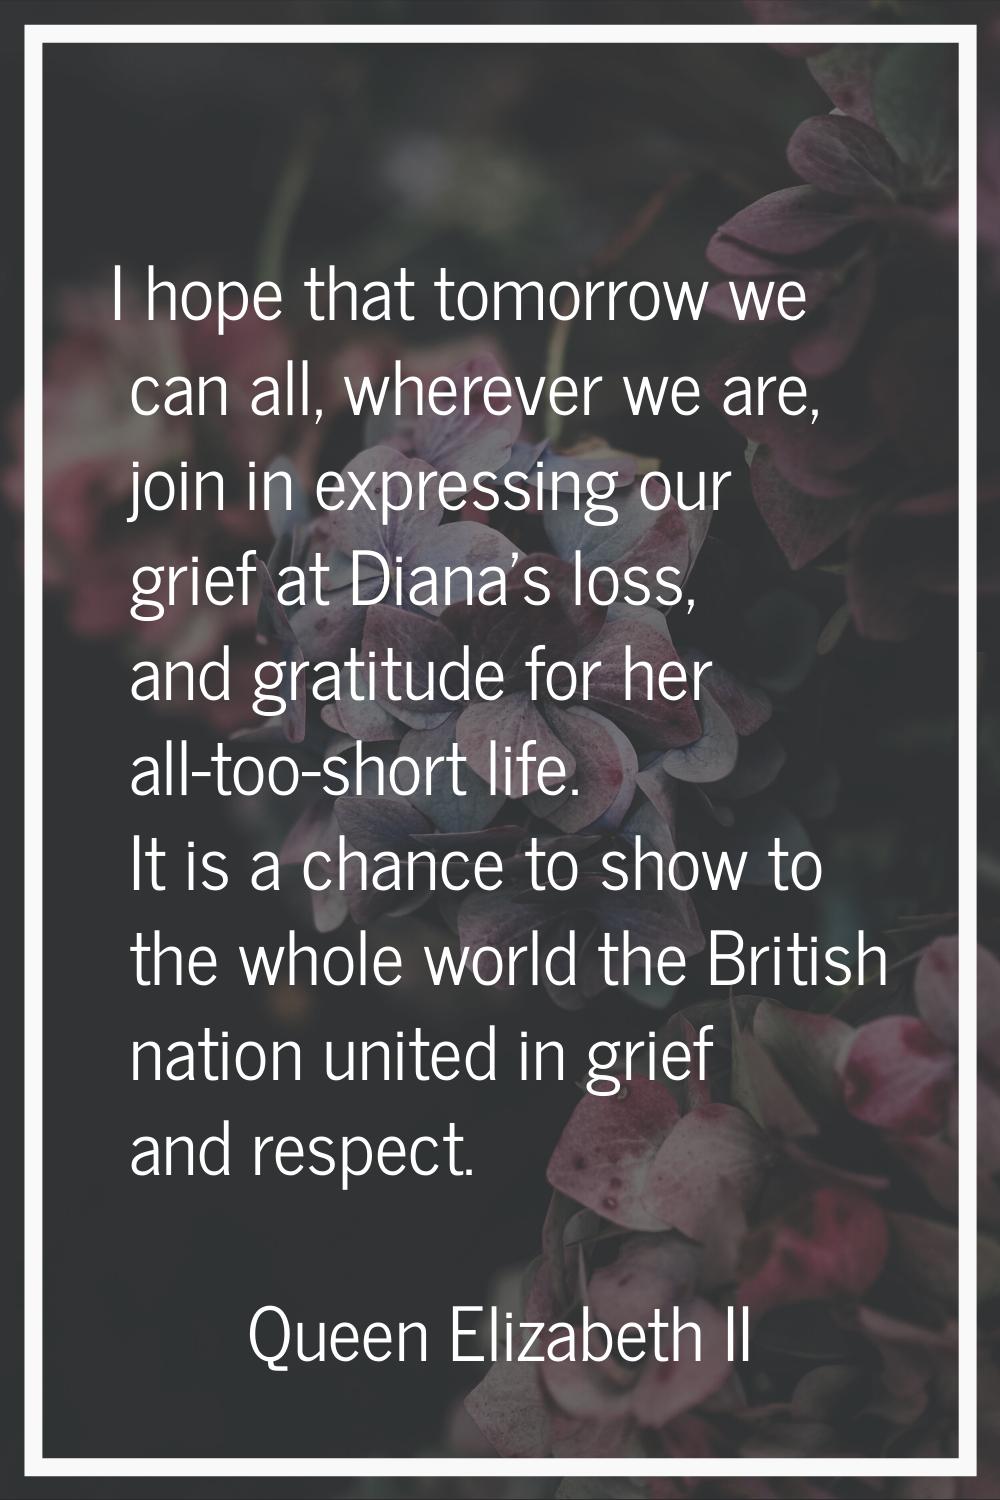 I hope that tomorrow we can all, wherever we are, join in expressing our grief at Diana's loss, and